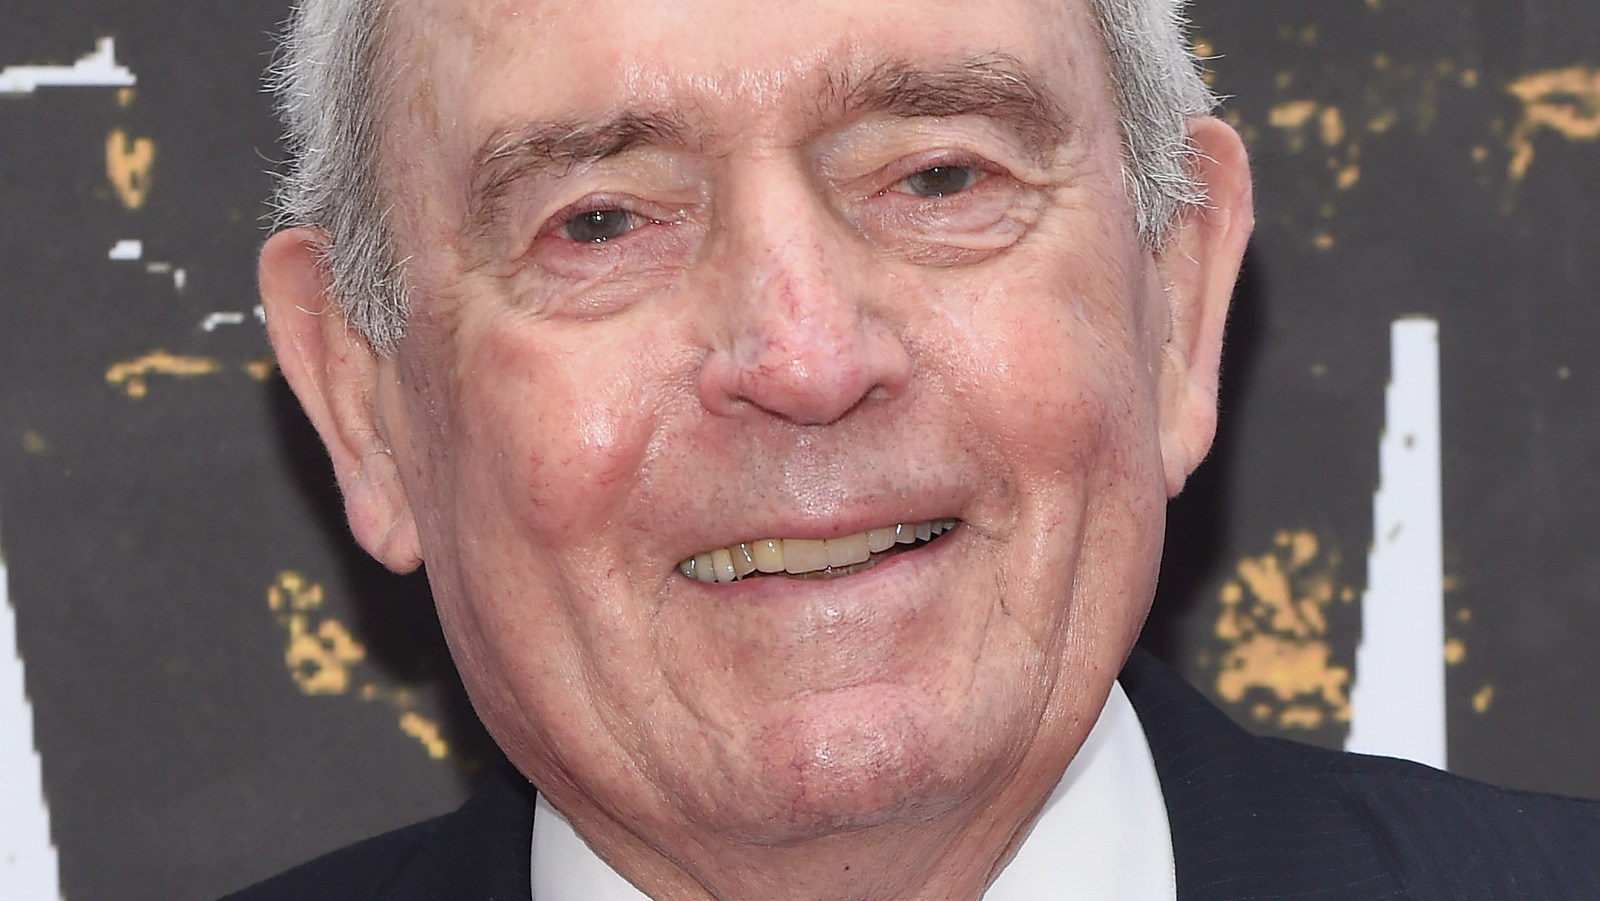 How Many Grandchildren Does Dan Rather have?